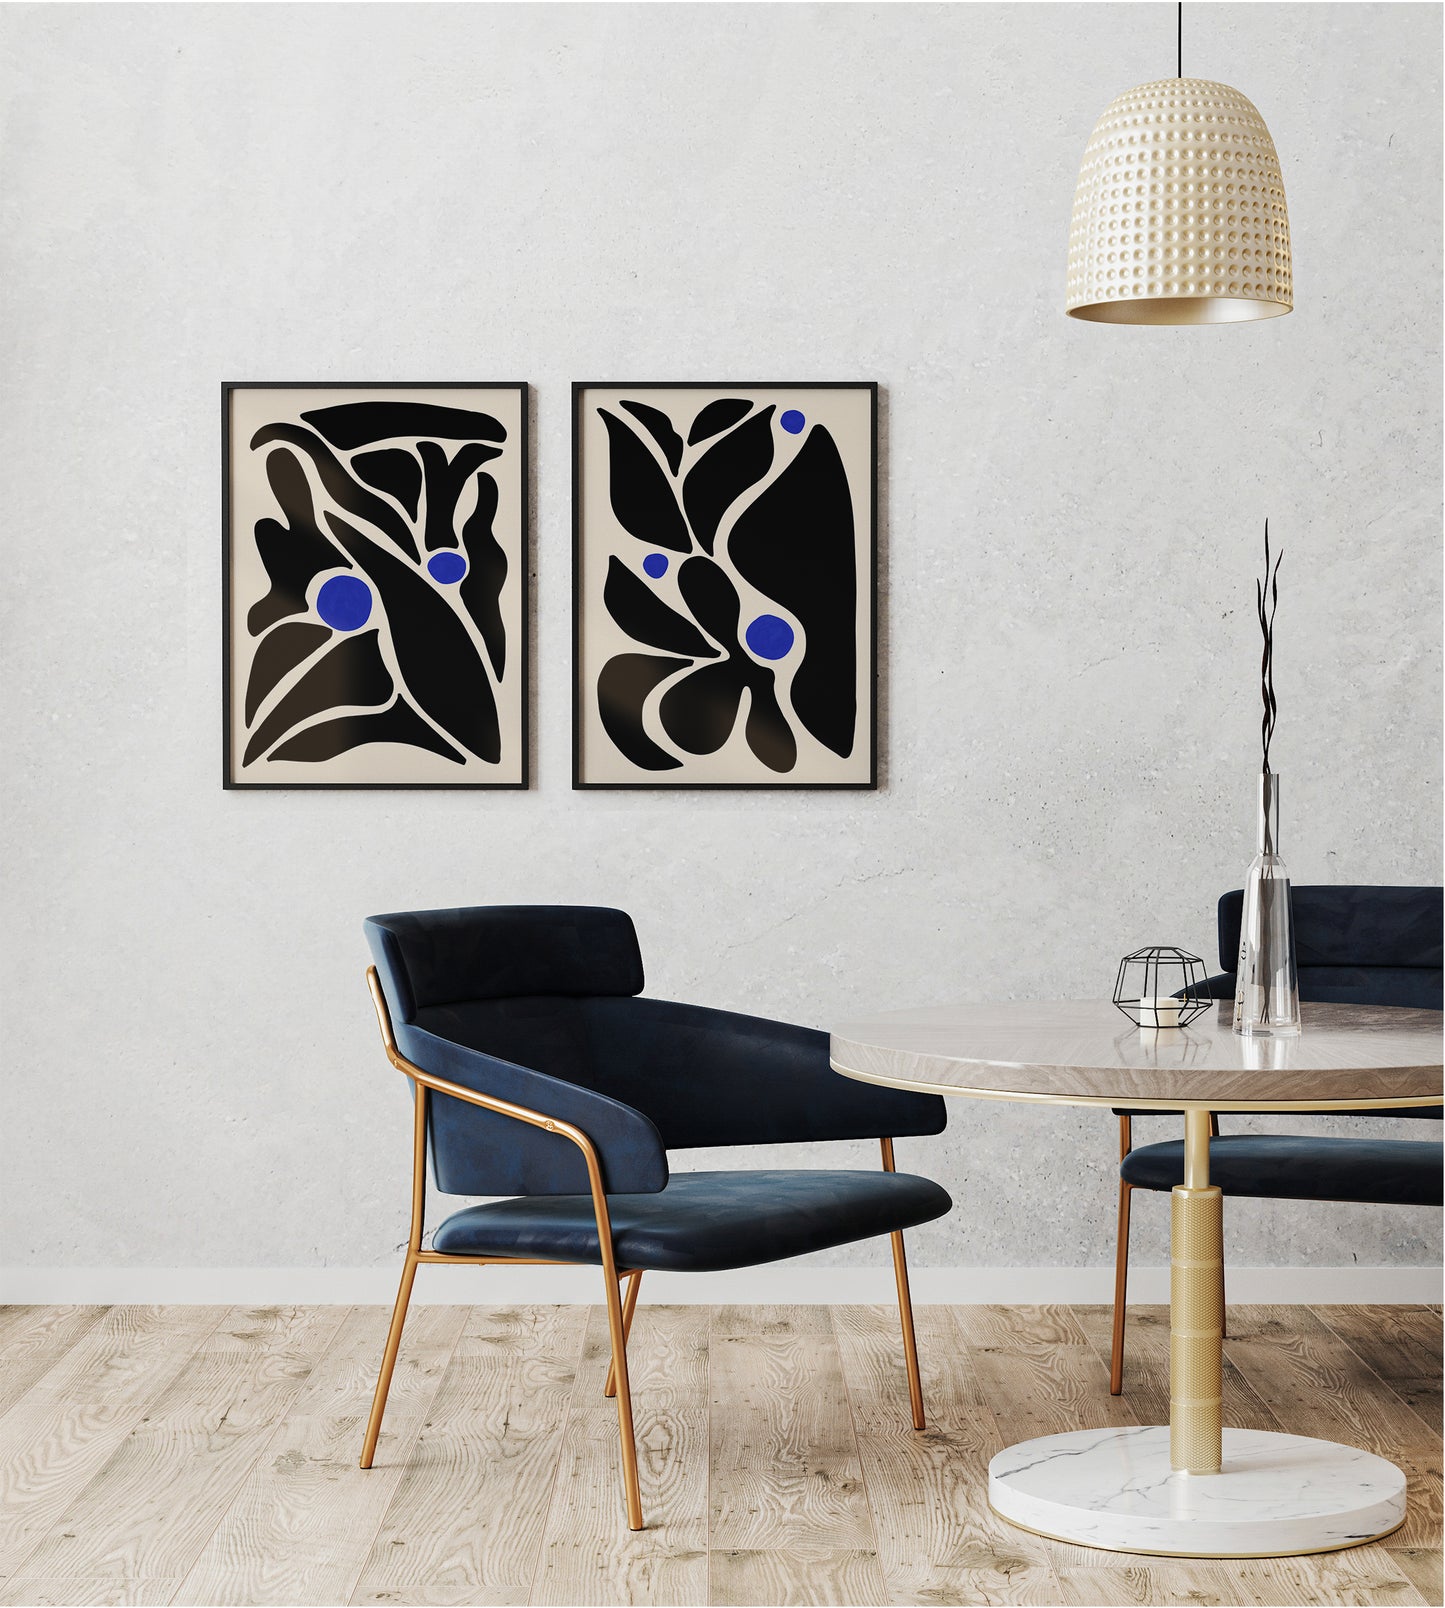 Set of 2 Aesthetic Modern Black Floral Posters